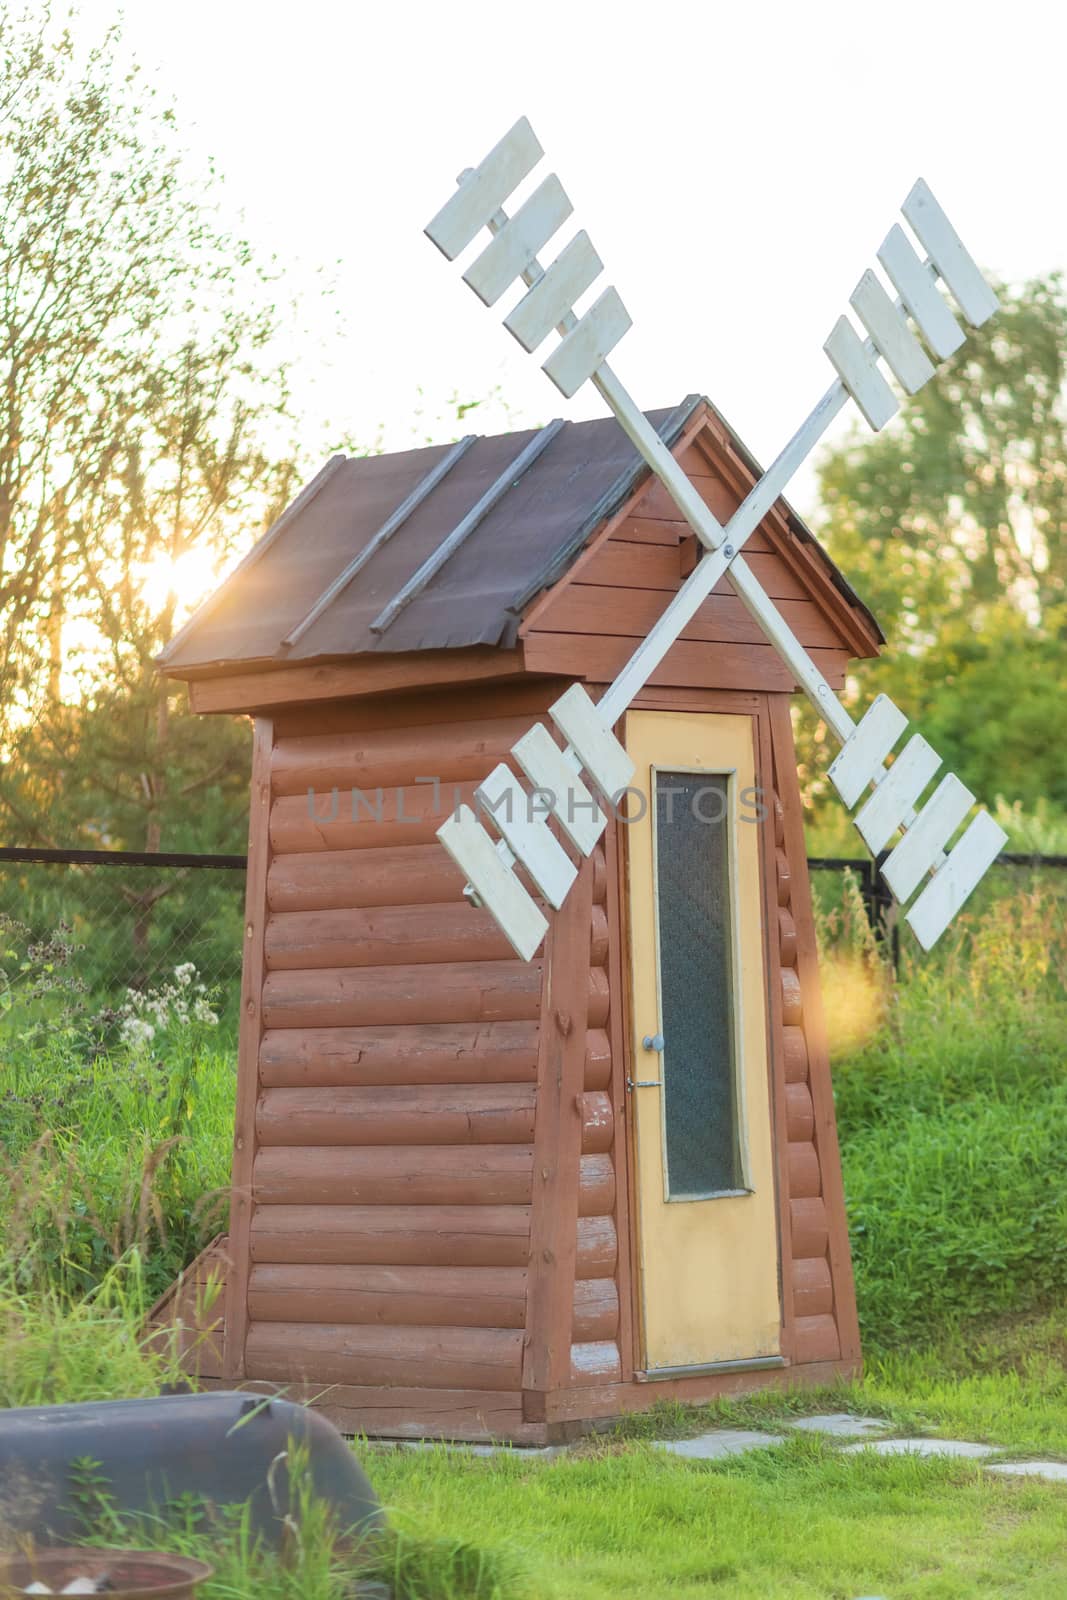 Rustic outdoor toilet in the form of a windmill.